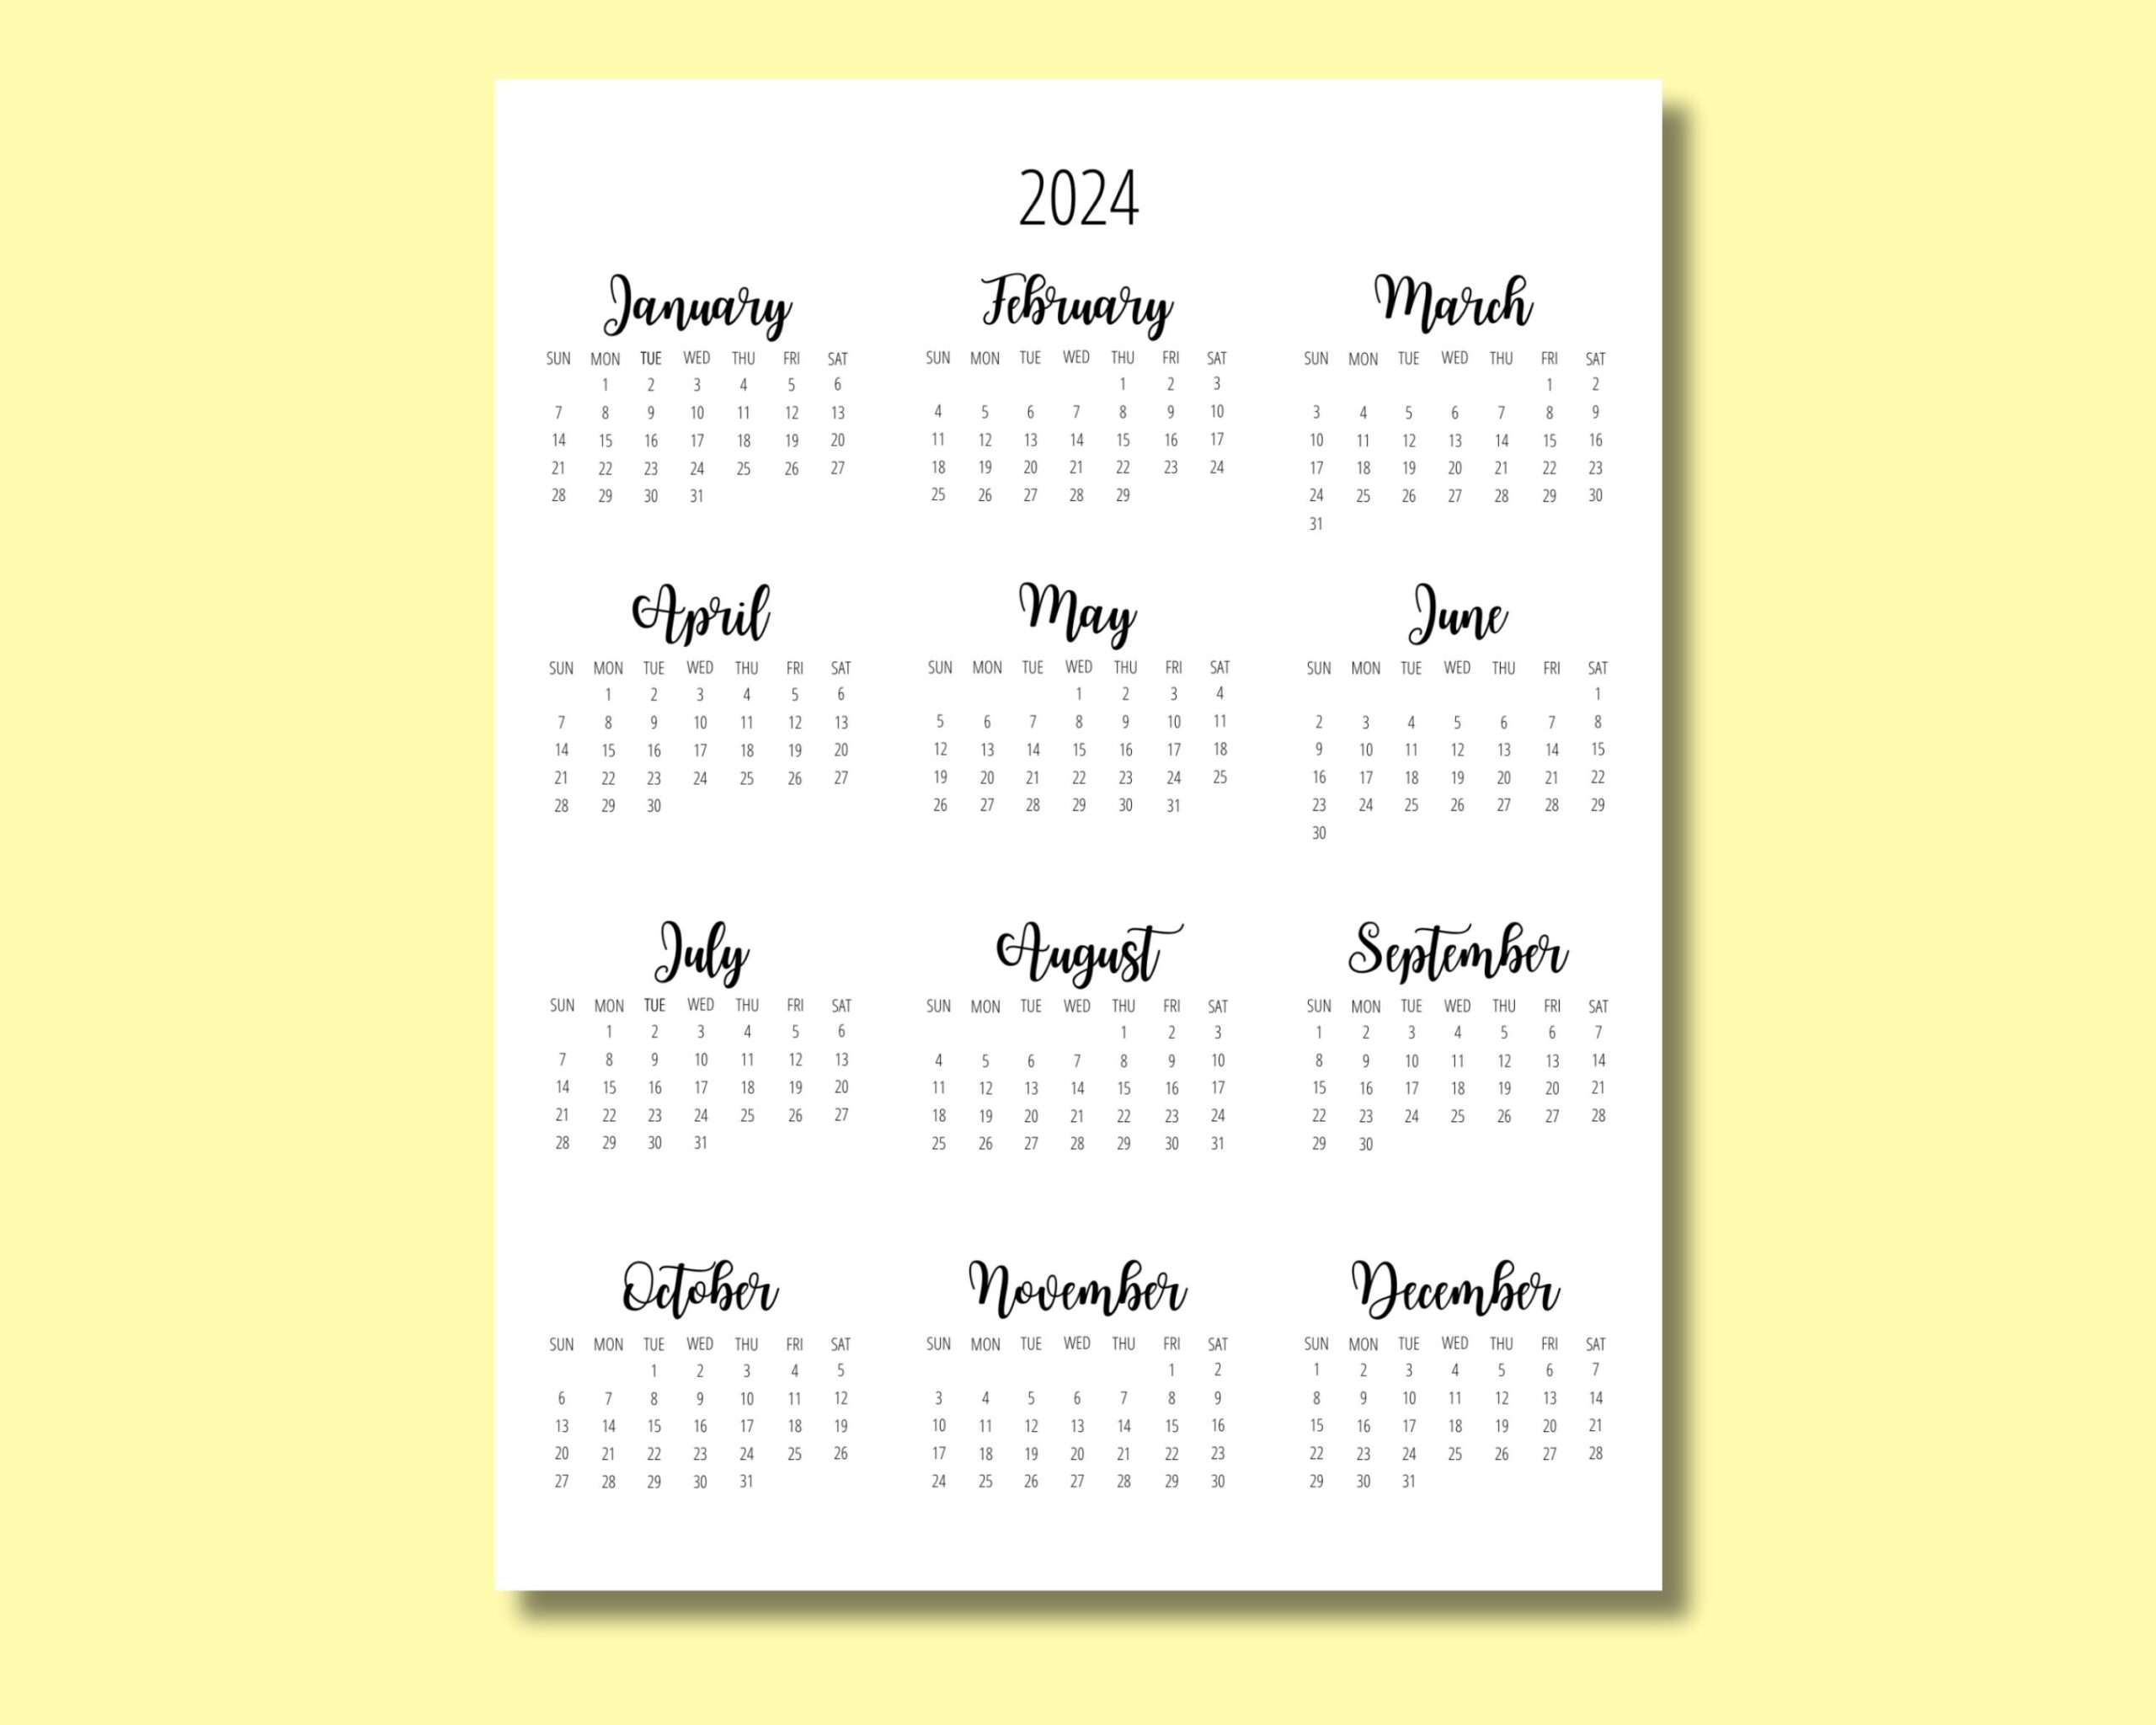 2024 Calendar Template 8.5 X 11 Inches Vertical Year At A Glance within Free Printable Calendar 2024 Tumblr